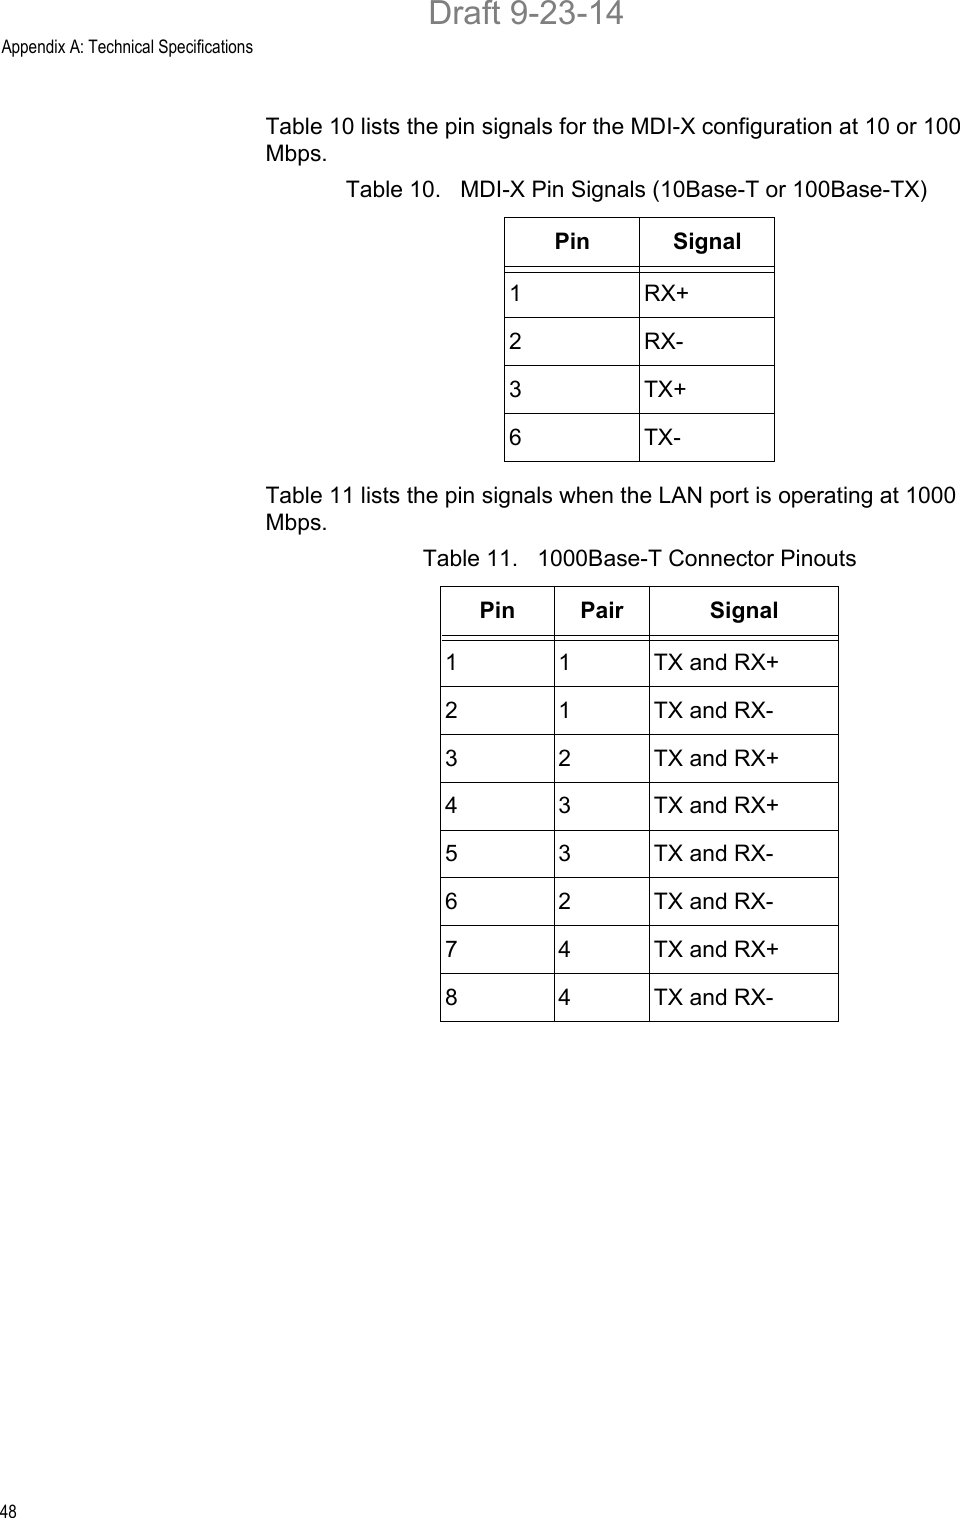 Appendix A: Technical Specifications48Table 10 lists the pin signals for the MDI-X configuration at 10 or 100 Mbps.Table 11 lists the pin signals when the LAN port is operating at 1000 Mbps.Table 10.   MDI-X Pin Signals (10Base-T or 100Base-TX)Pin Signal1RX+2RX-3TX+6TX-Table 11.   1000Base-T Connector PinoutsPin Pair Signal1 1 TX and RX+2 1 TX and RX-3 2 TX and RX+4 3 TX and RX+5 3 TX and RX-6 2 TX and RX-7 4 TX and RX+8 4 TX and RX-Draft 9-23-14